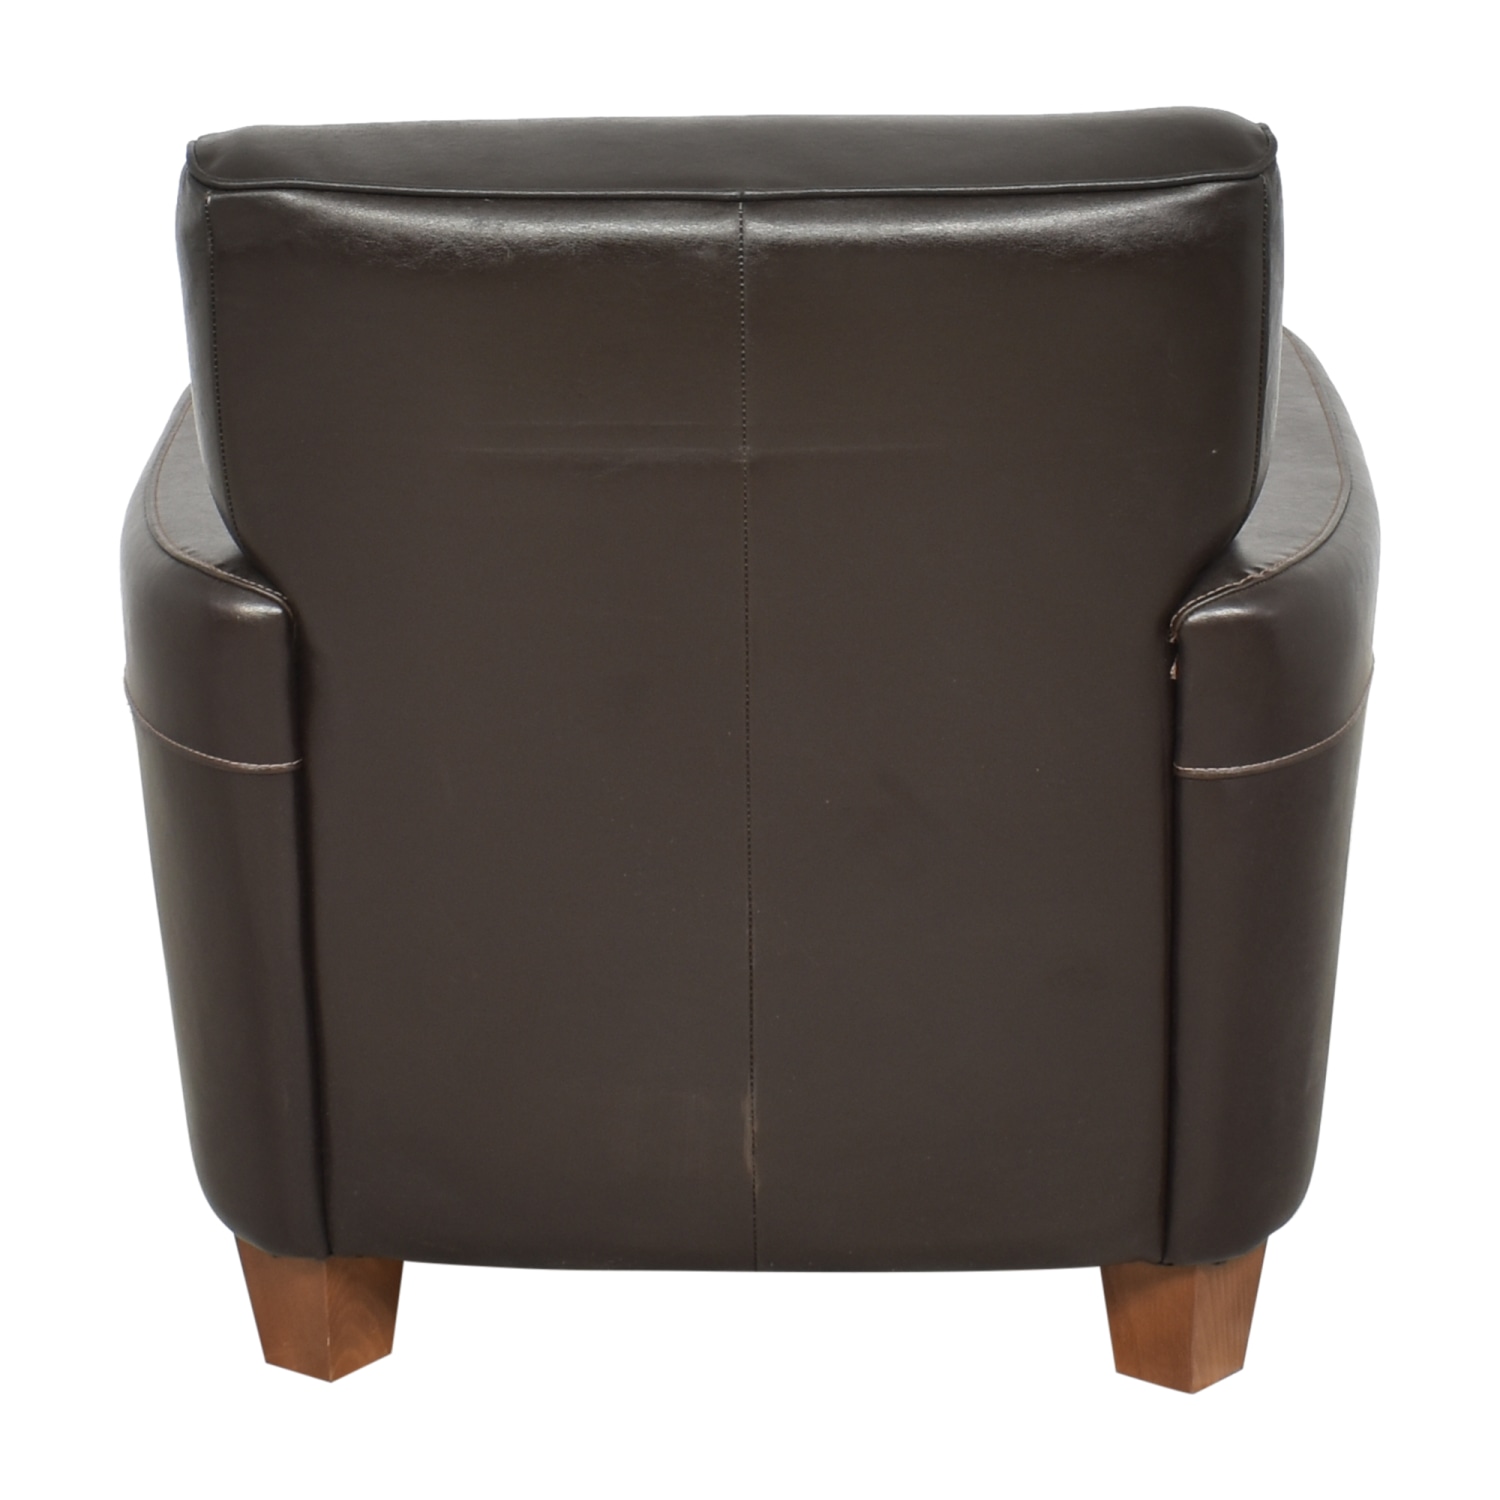 buy Chateau d'Ax Chateau d'Ax Upholstered Armchair online